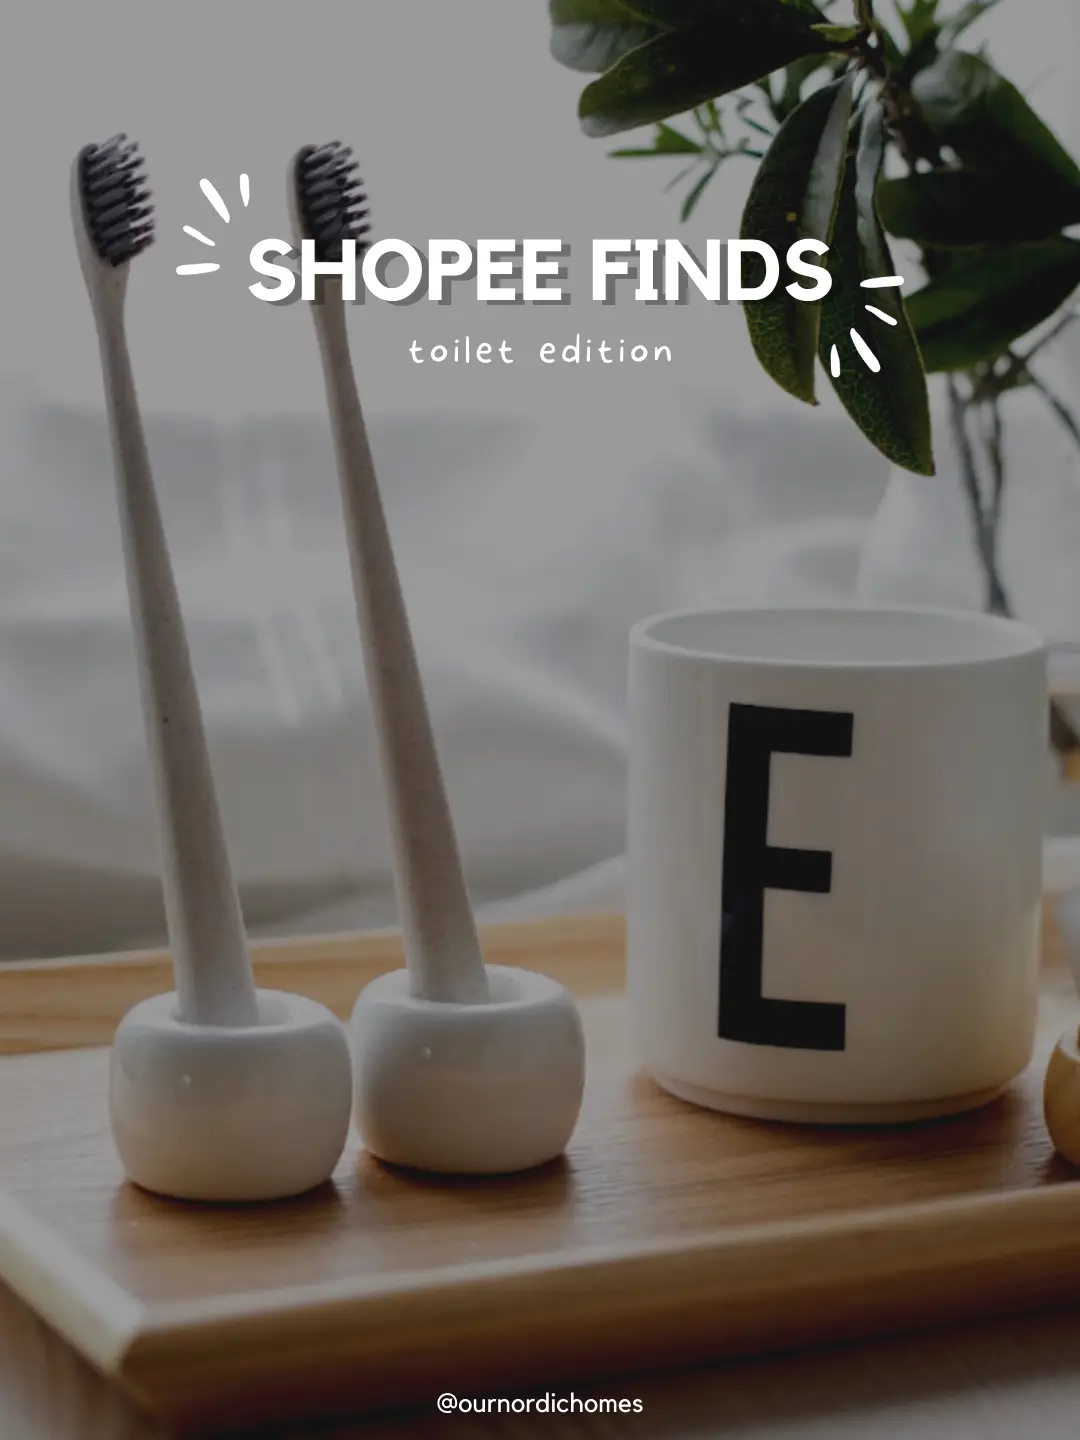 Shopee Finds | Toilet Edition's images